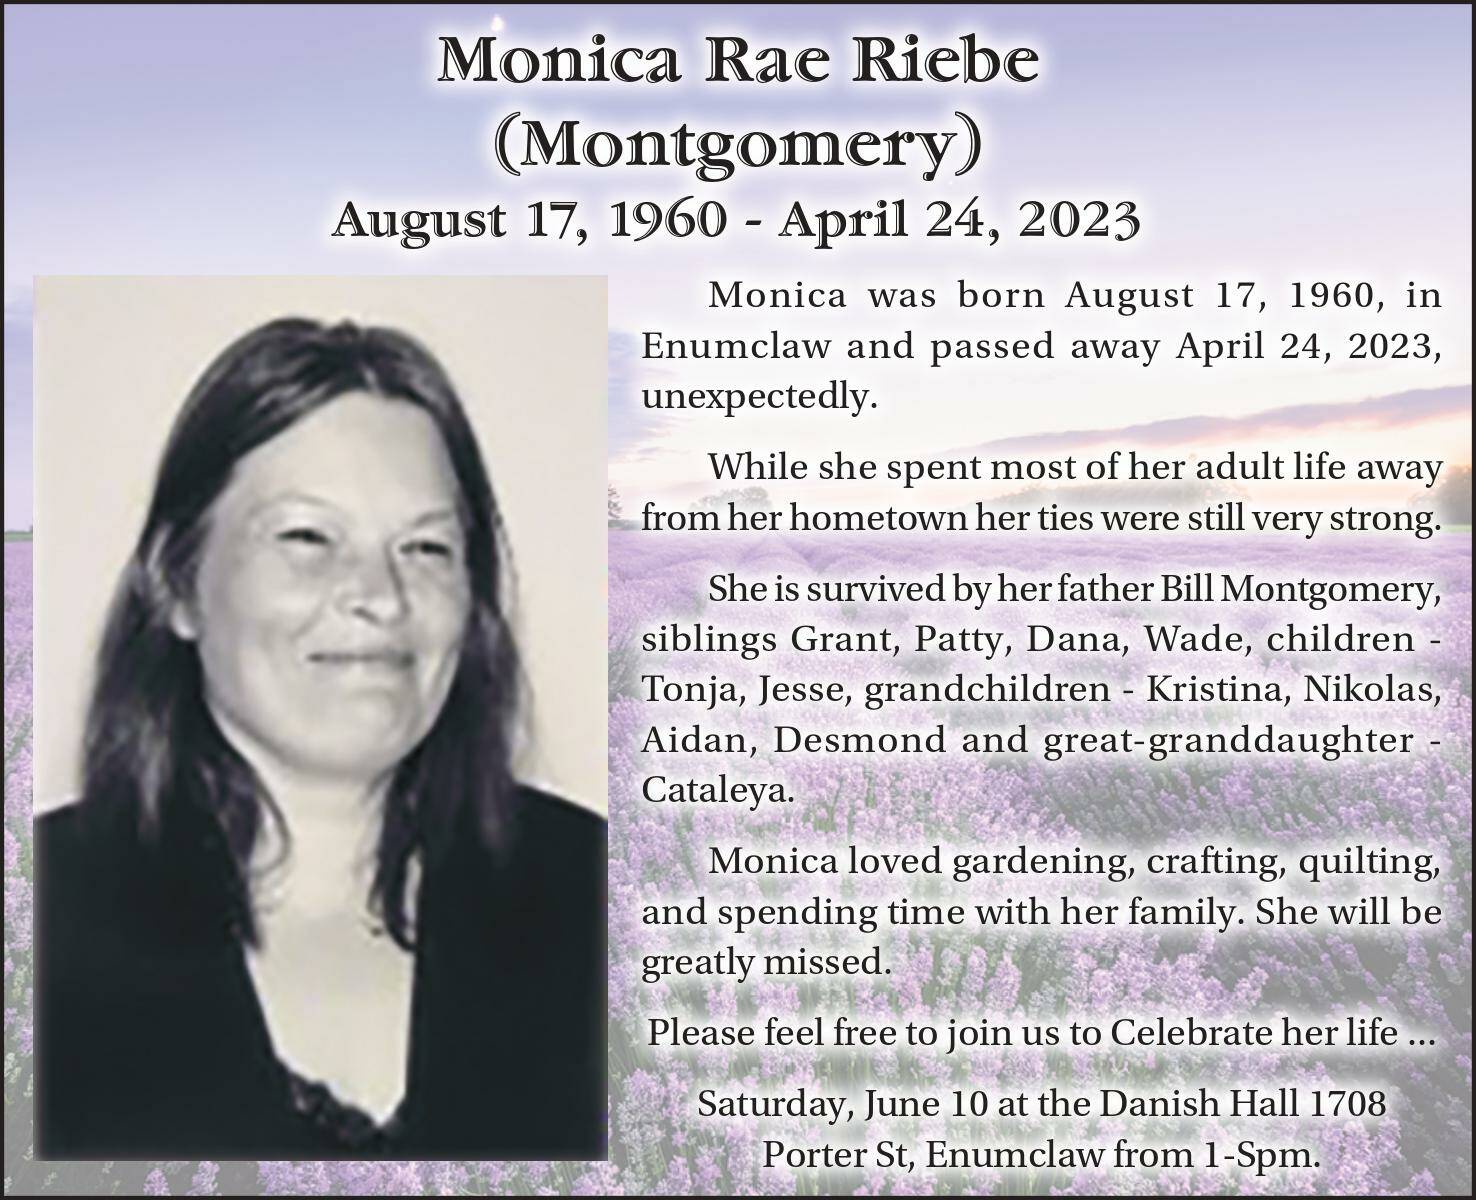 Monica Rae Riebe died April 24, 2023 at the age of 62.